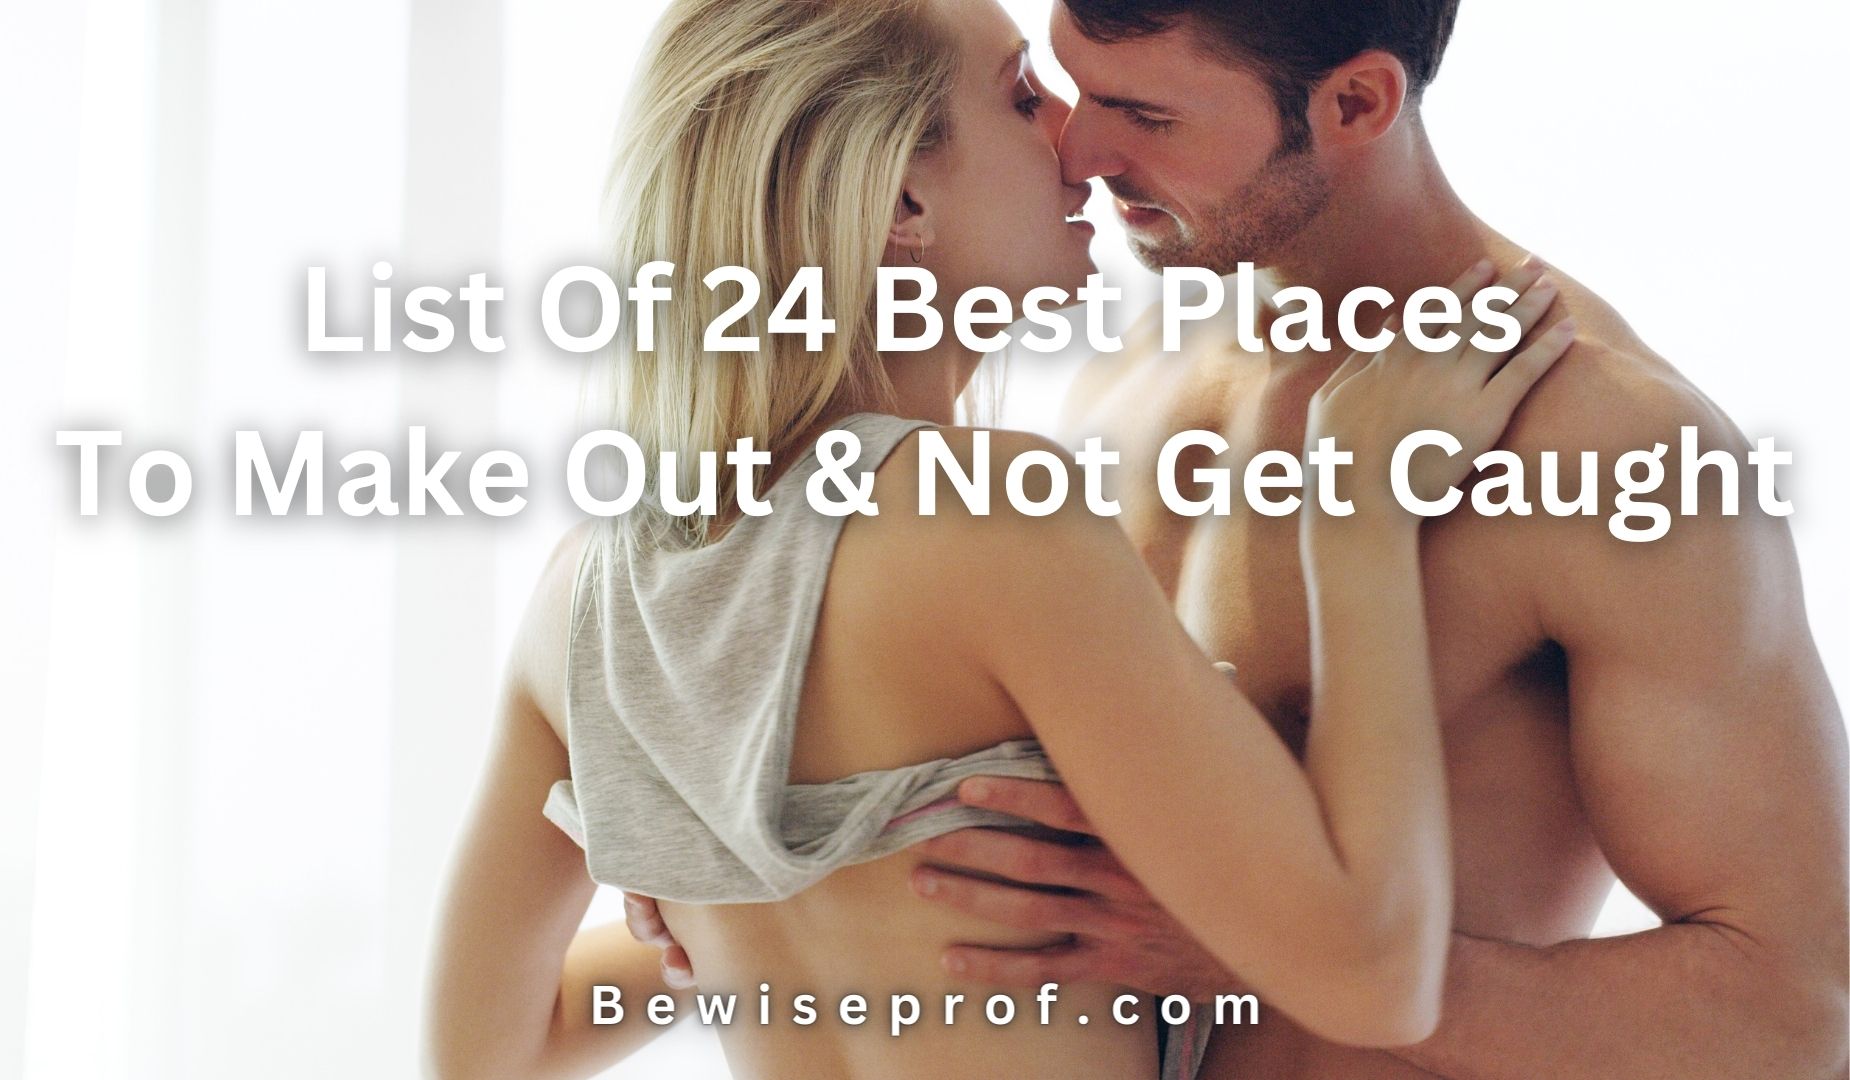 List Of 24 Best Places To Make Out